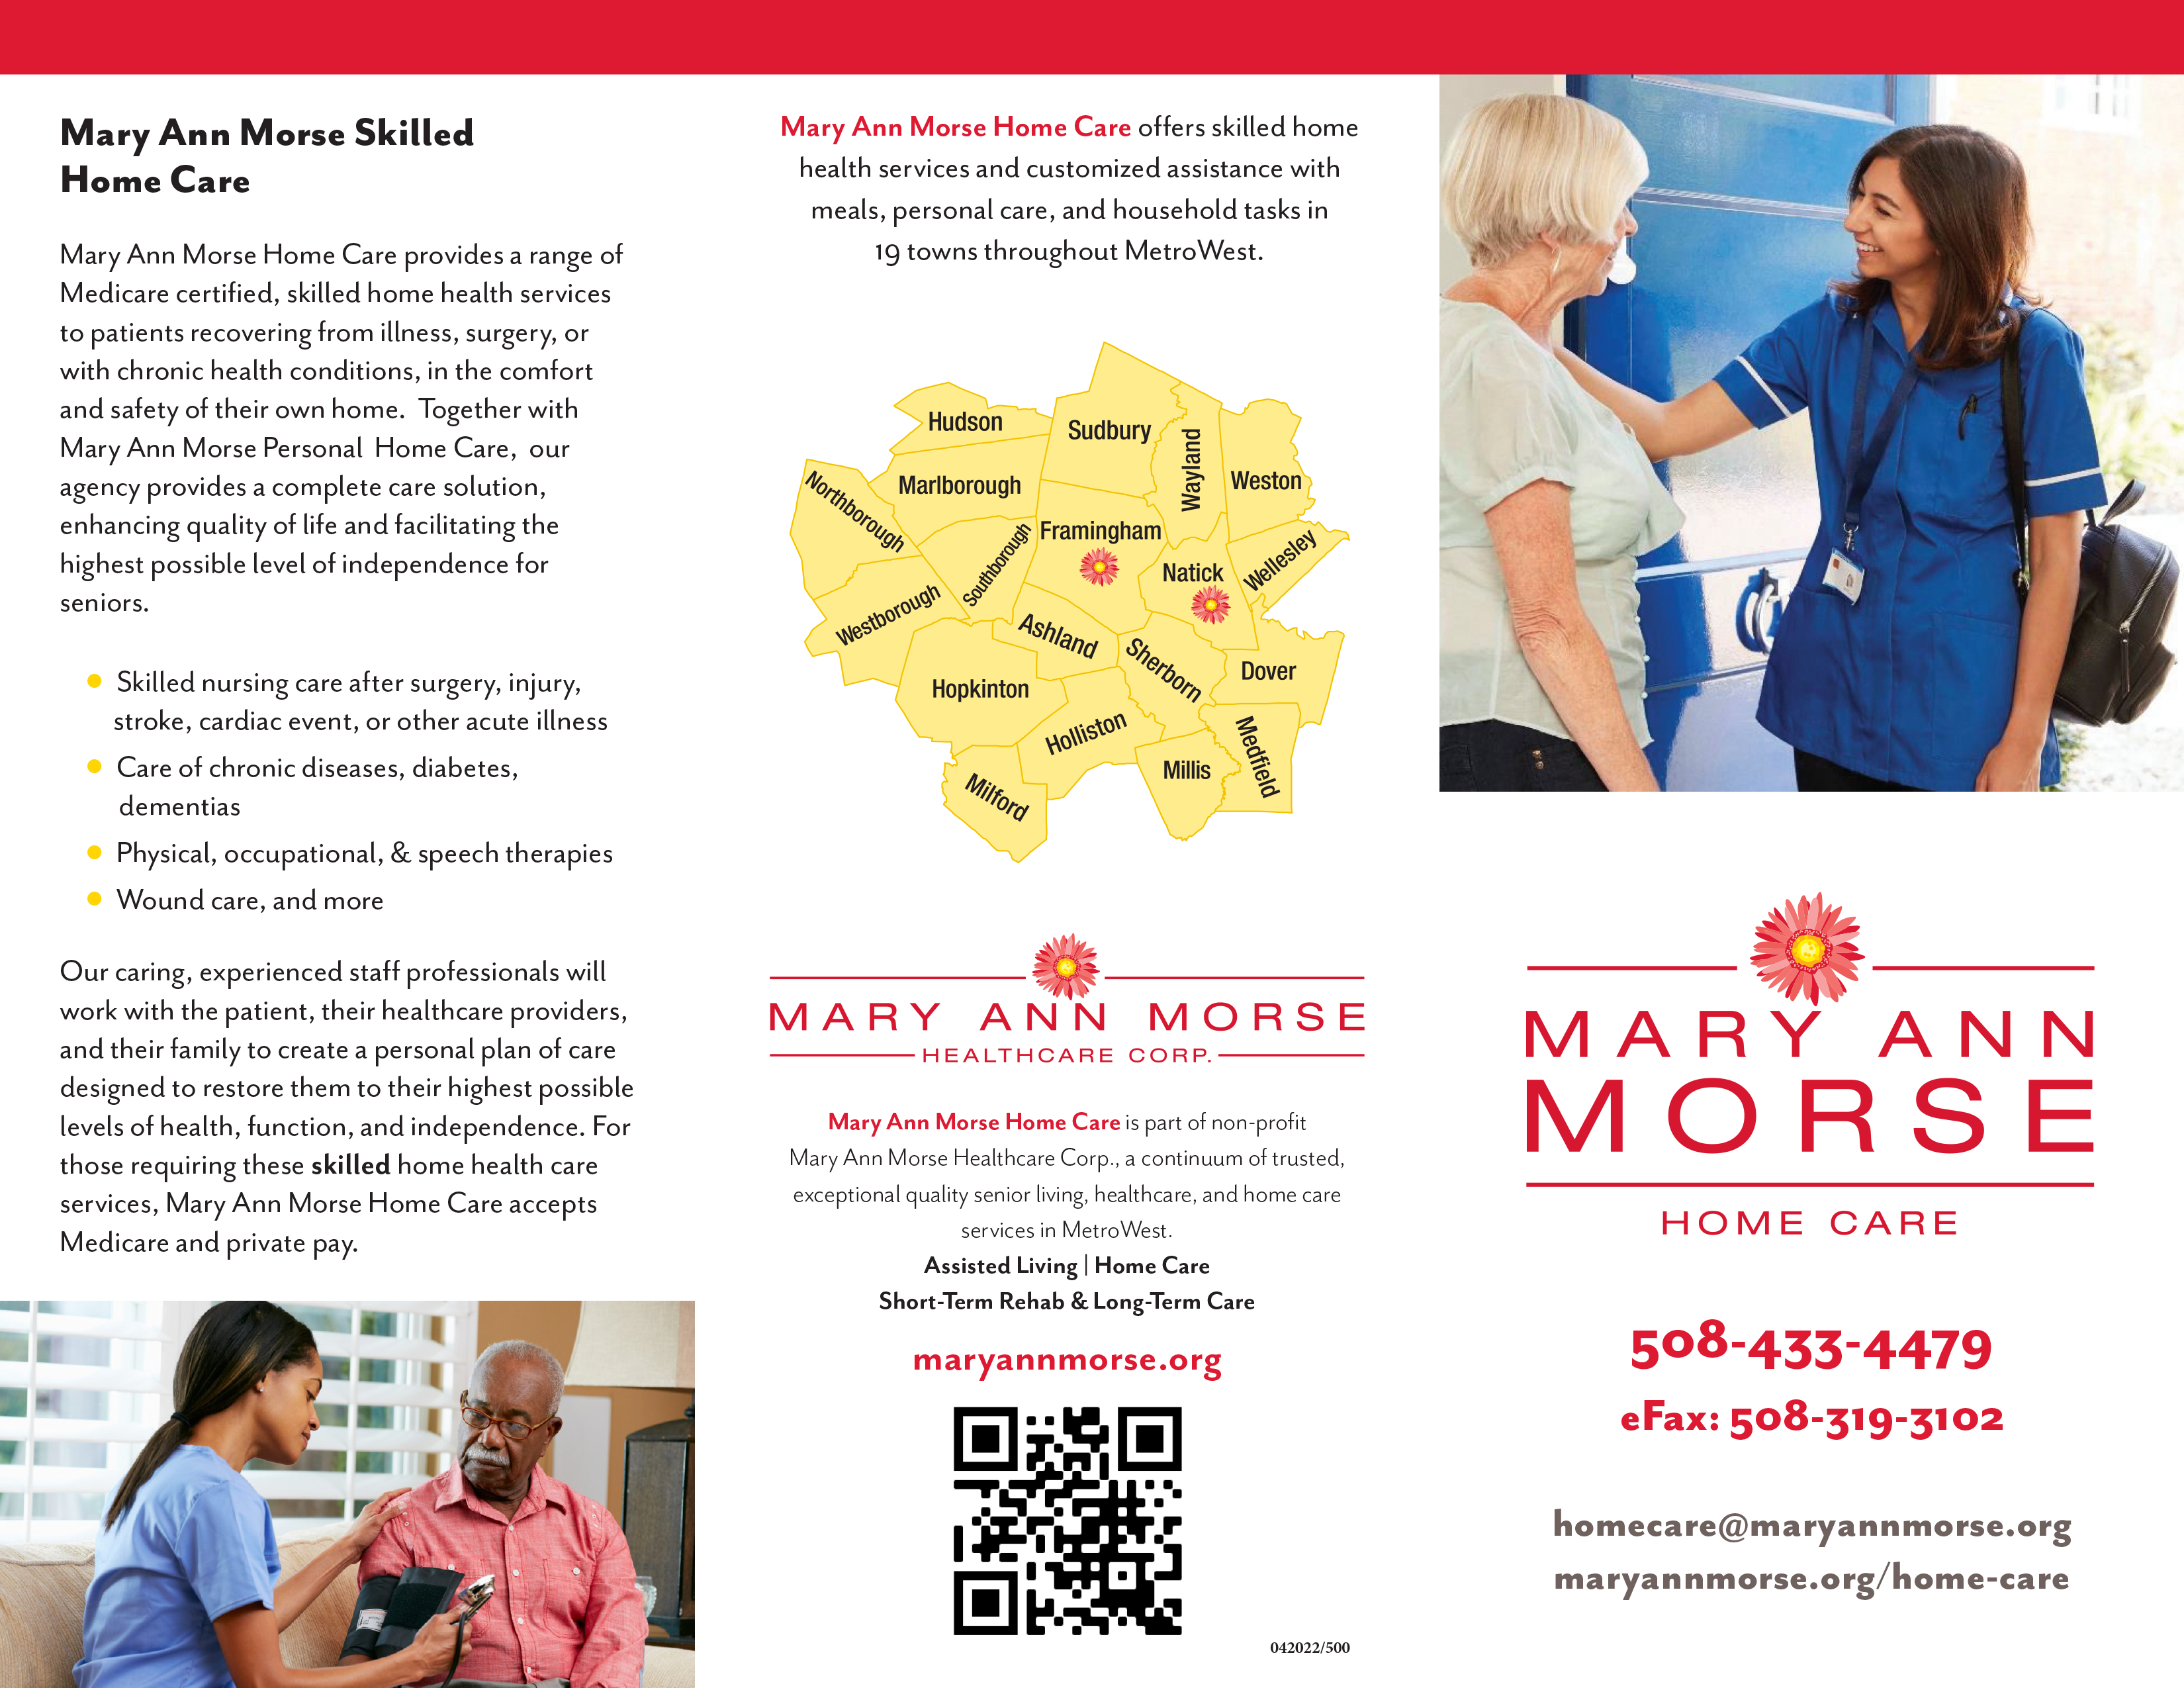 Download Our Home Care Brochure